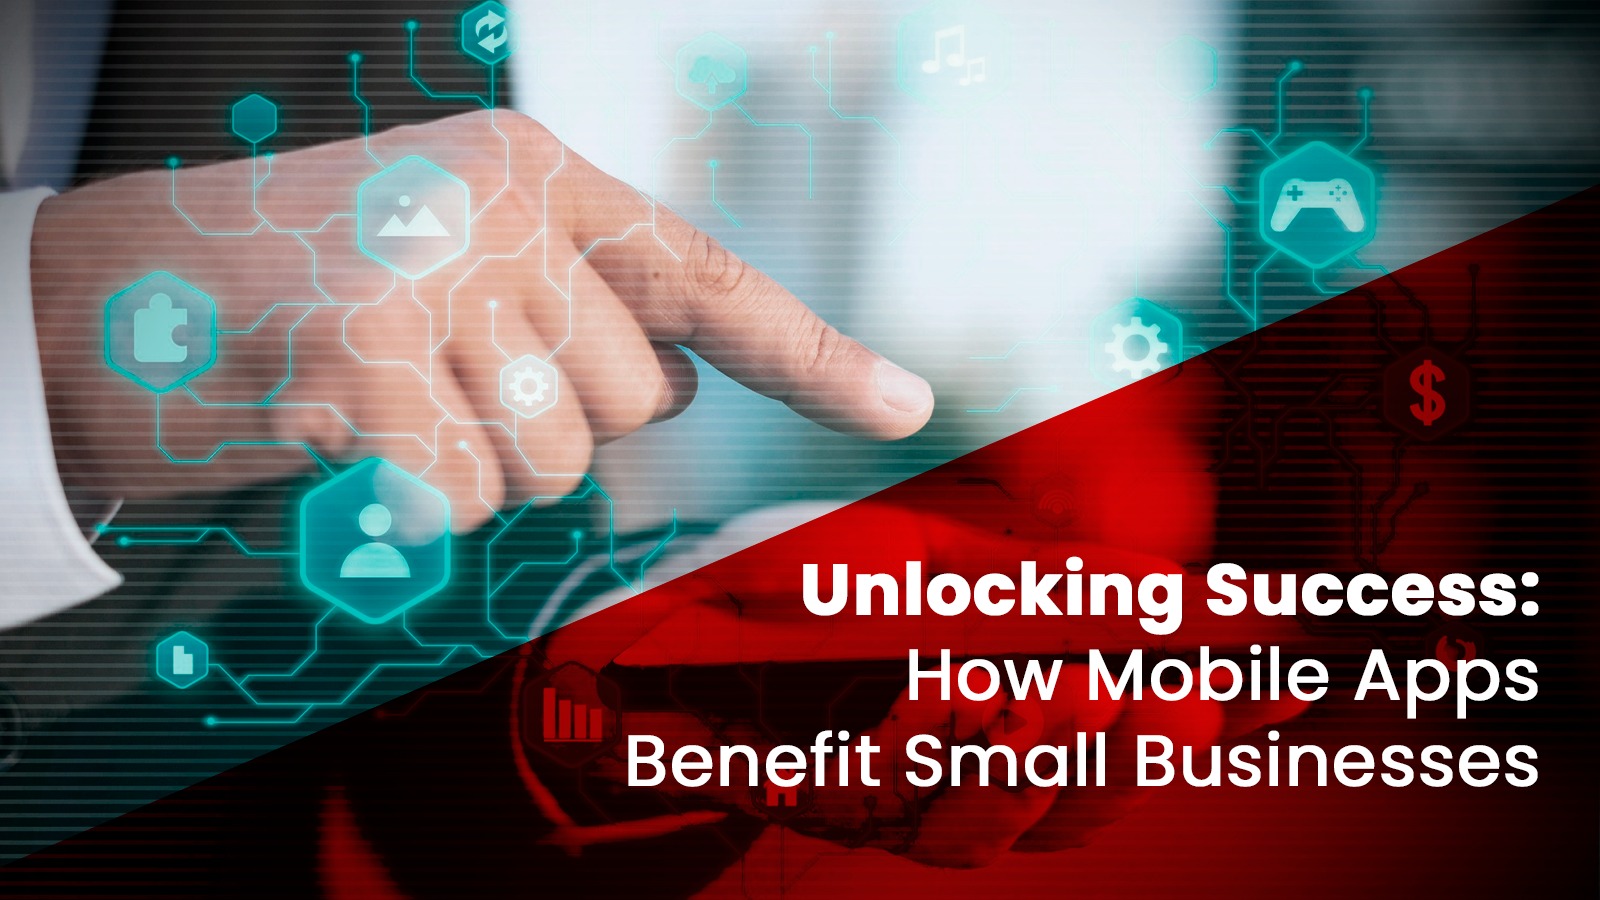 Mobile Apps Benefit Small Businesses